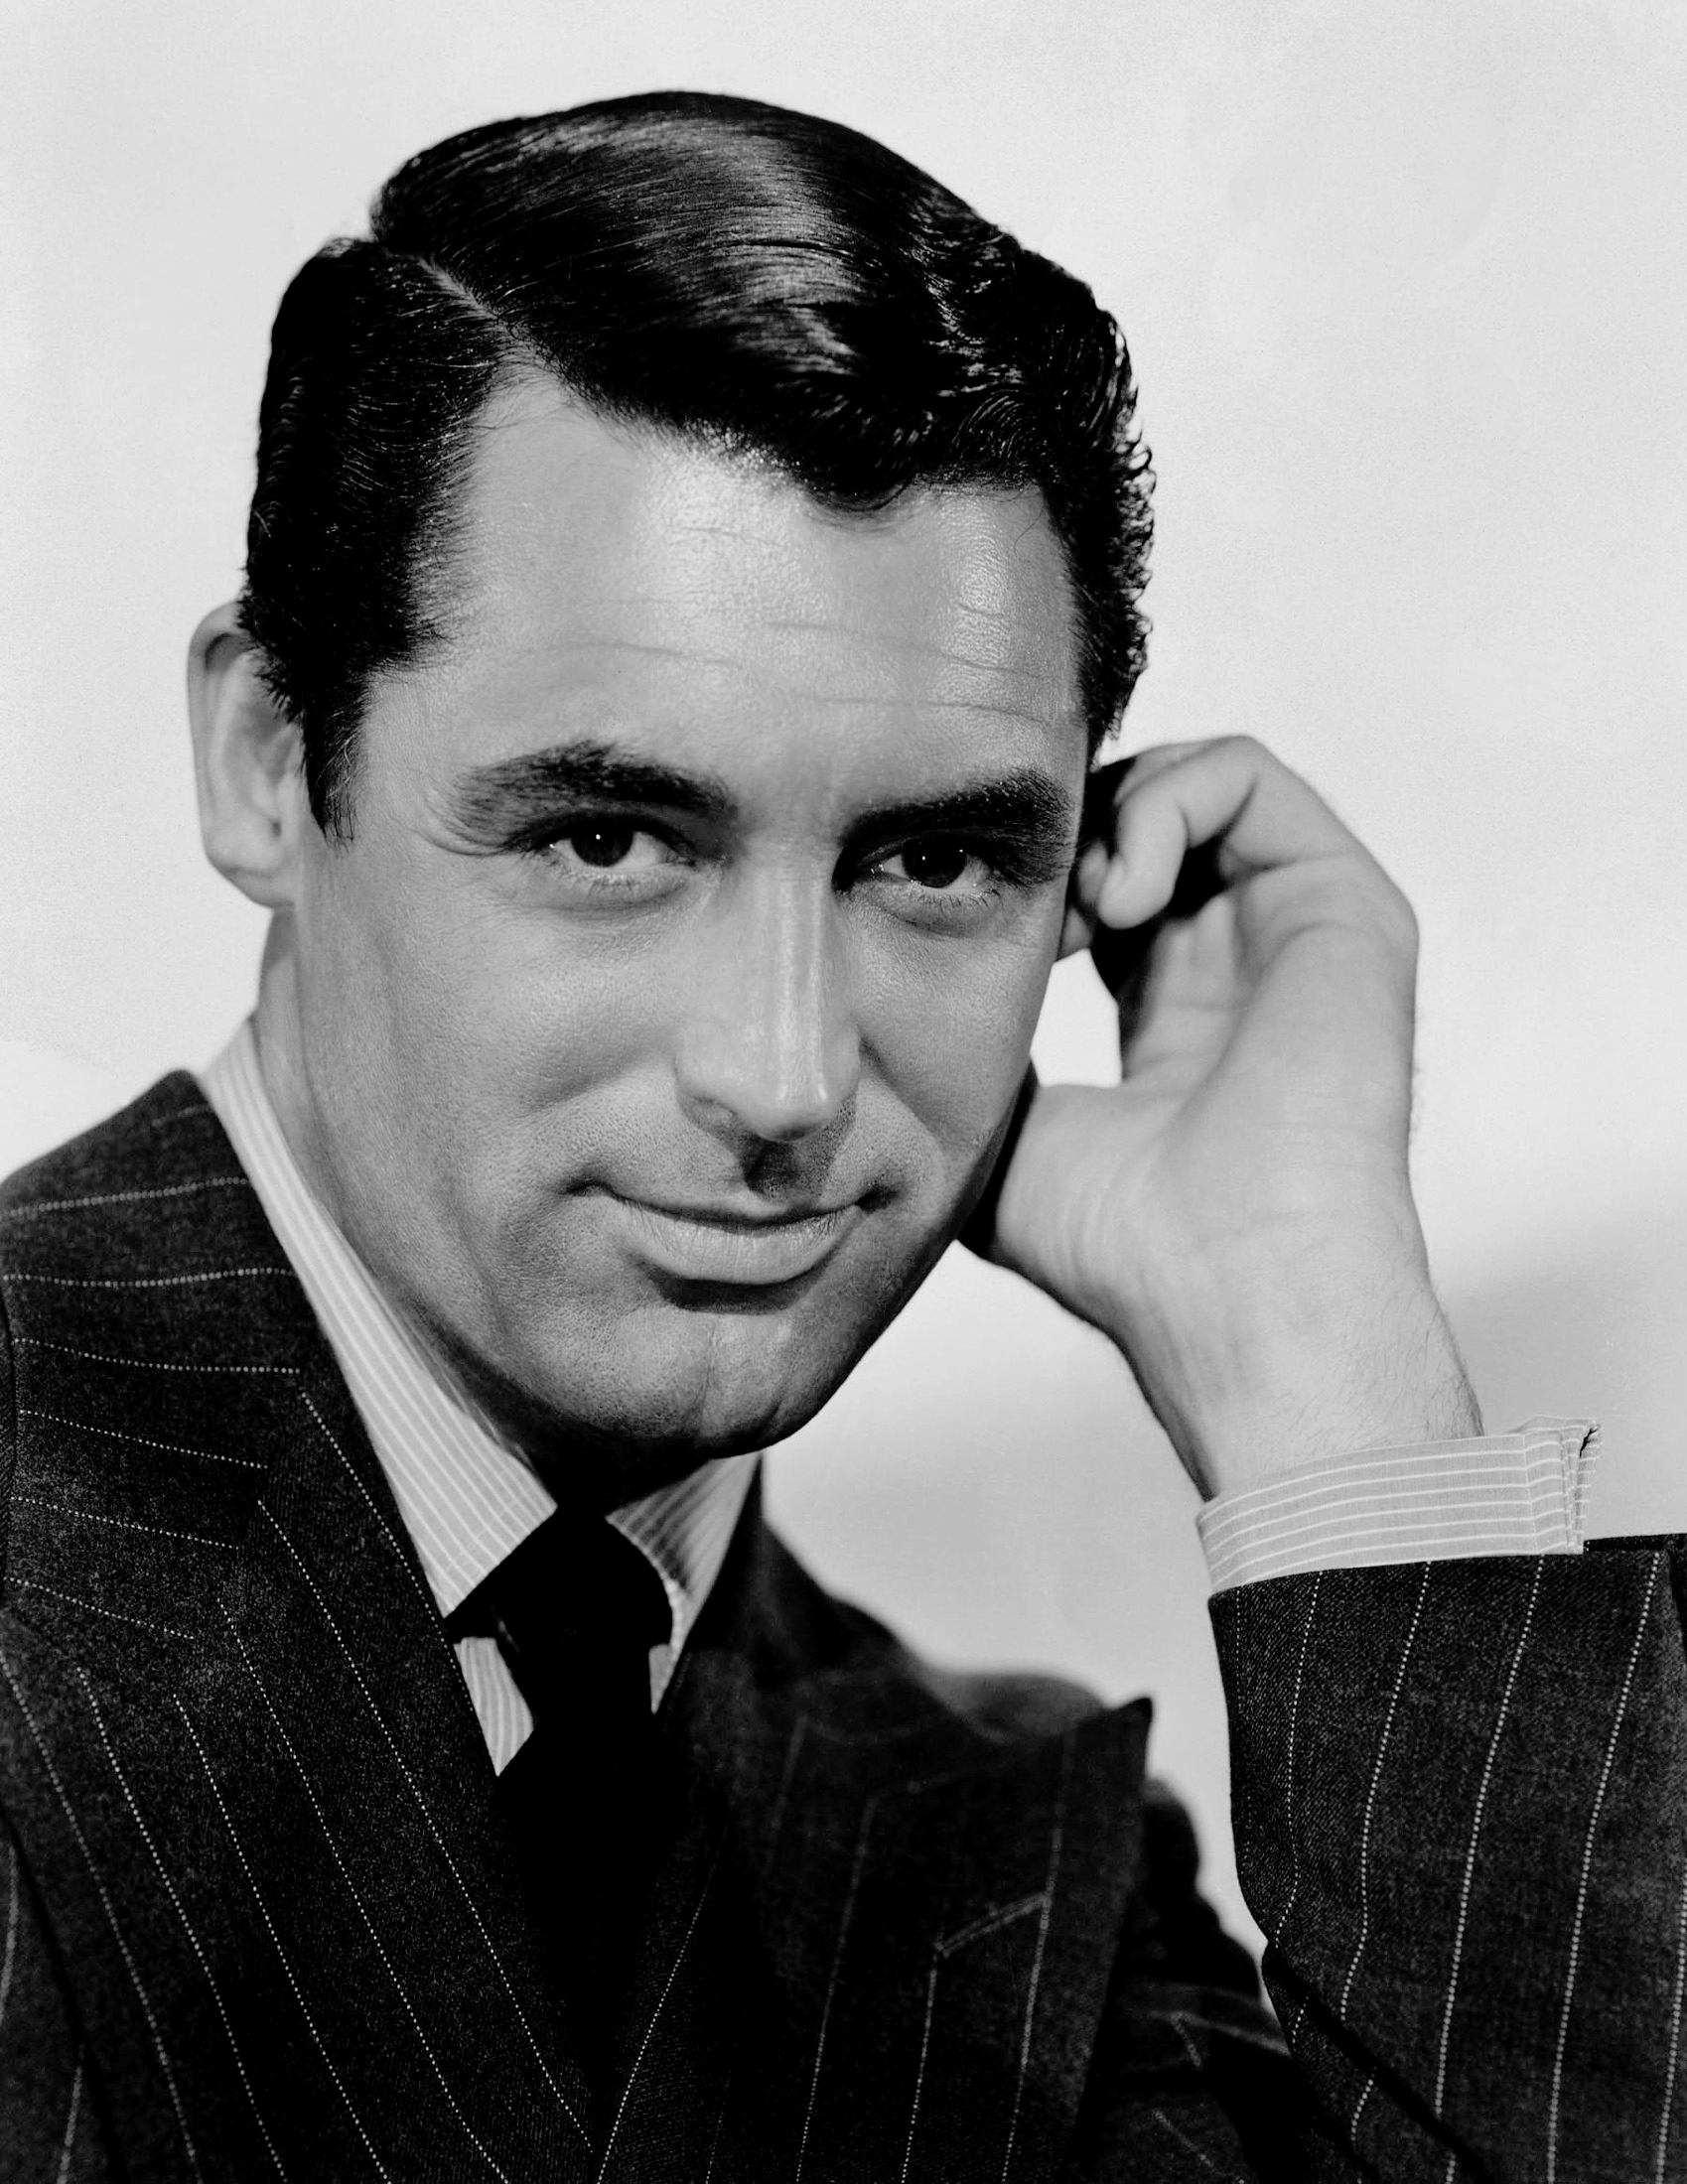 Grant Cary